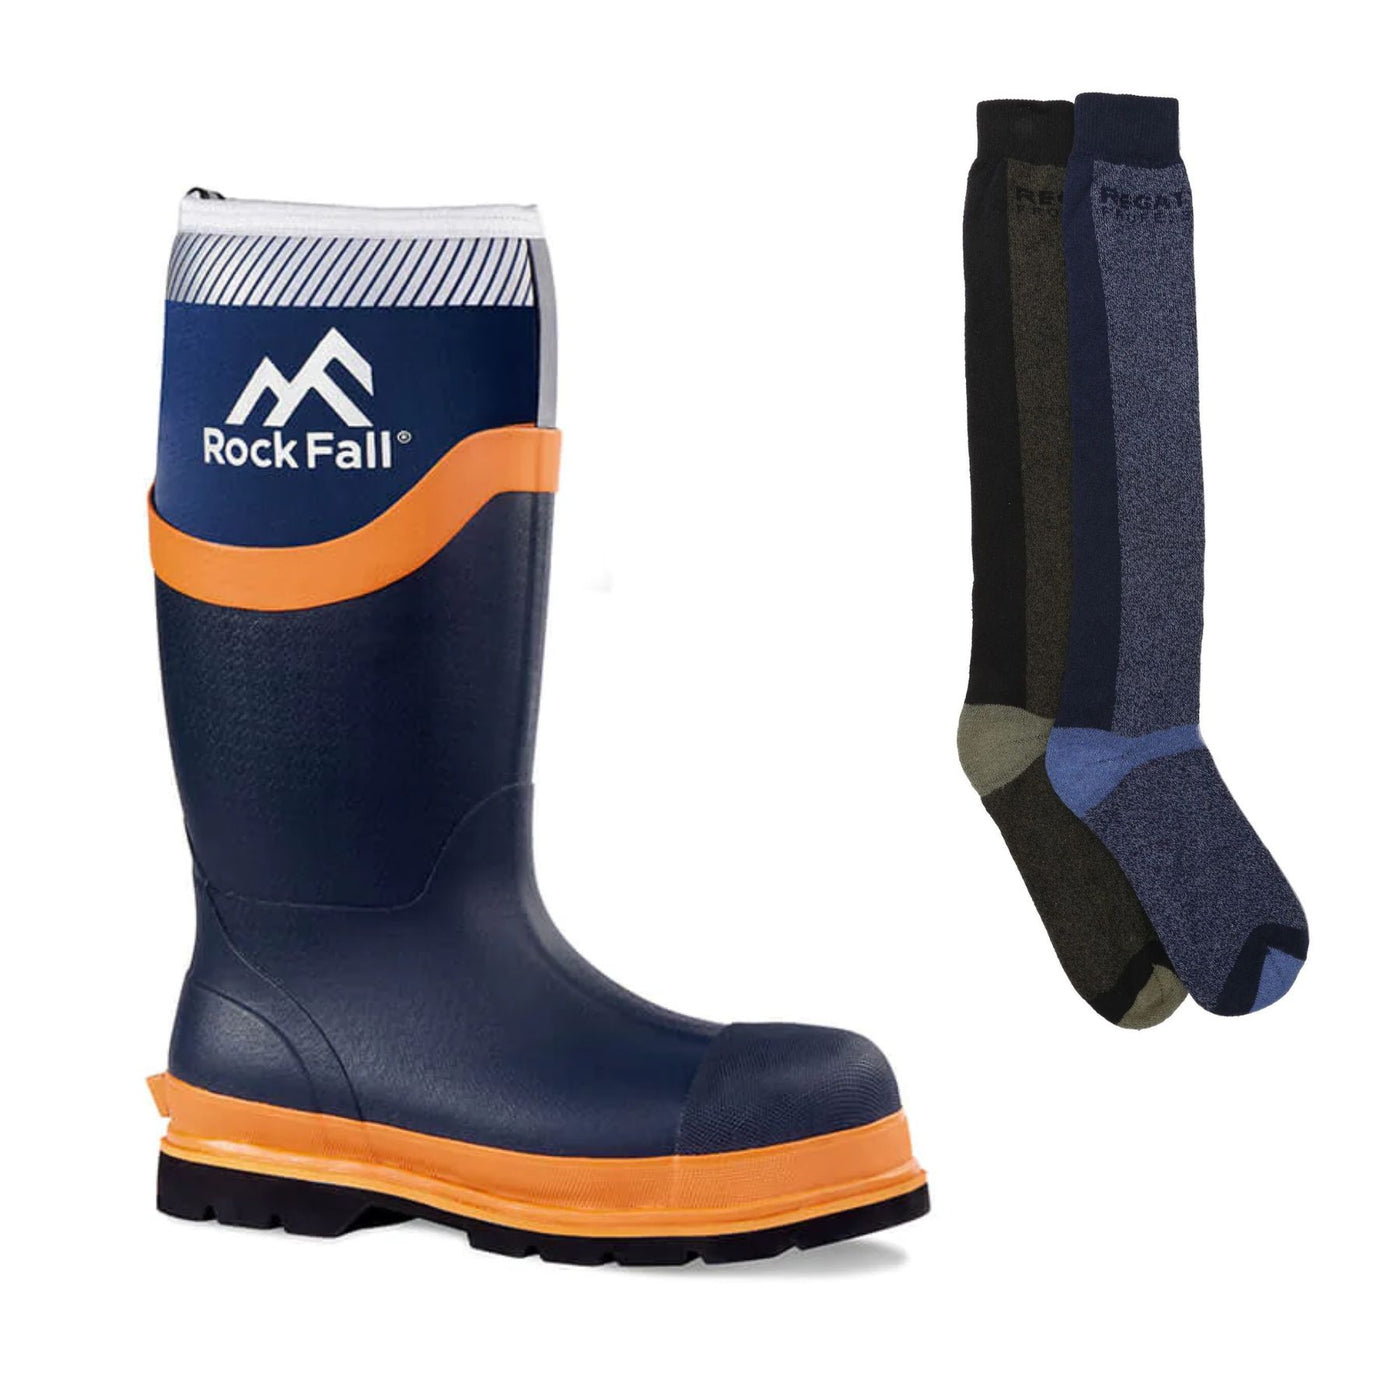 RockFall Silt Wellies Special Offer Pack - RF290 Neoprene Safety Wellington Boots + 2 Pairs Welly Socks